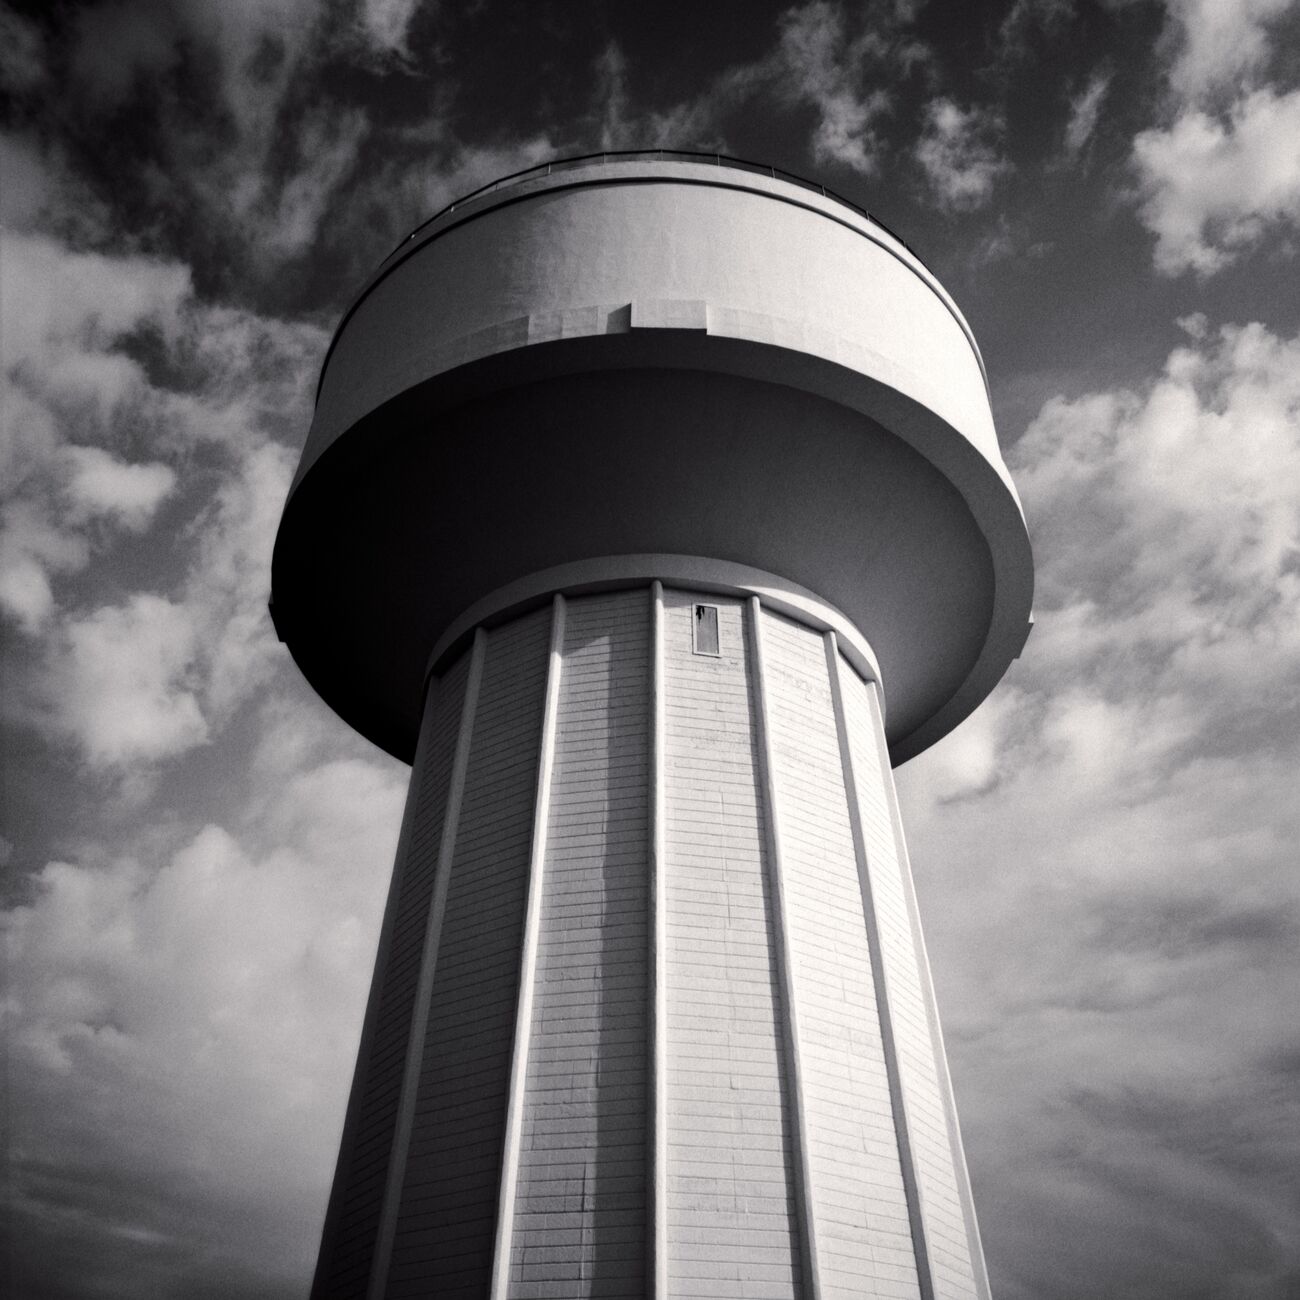 Fine-Art print 17.7 x 17.7 in, Water Tower. Ref-11598-4 - Denis Olivier Photography